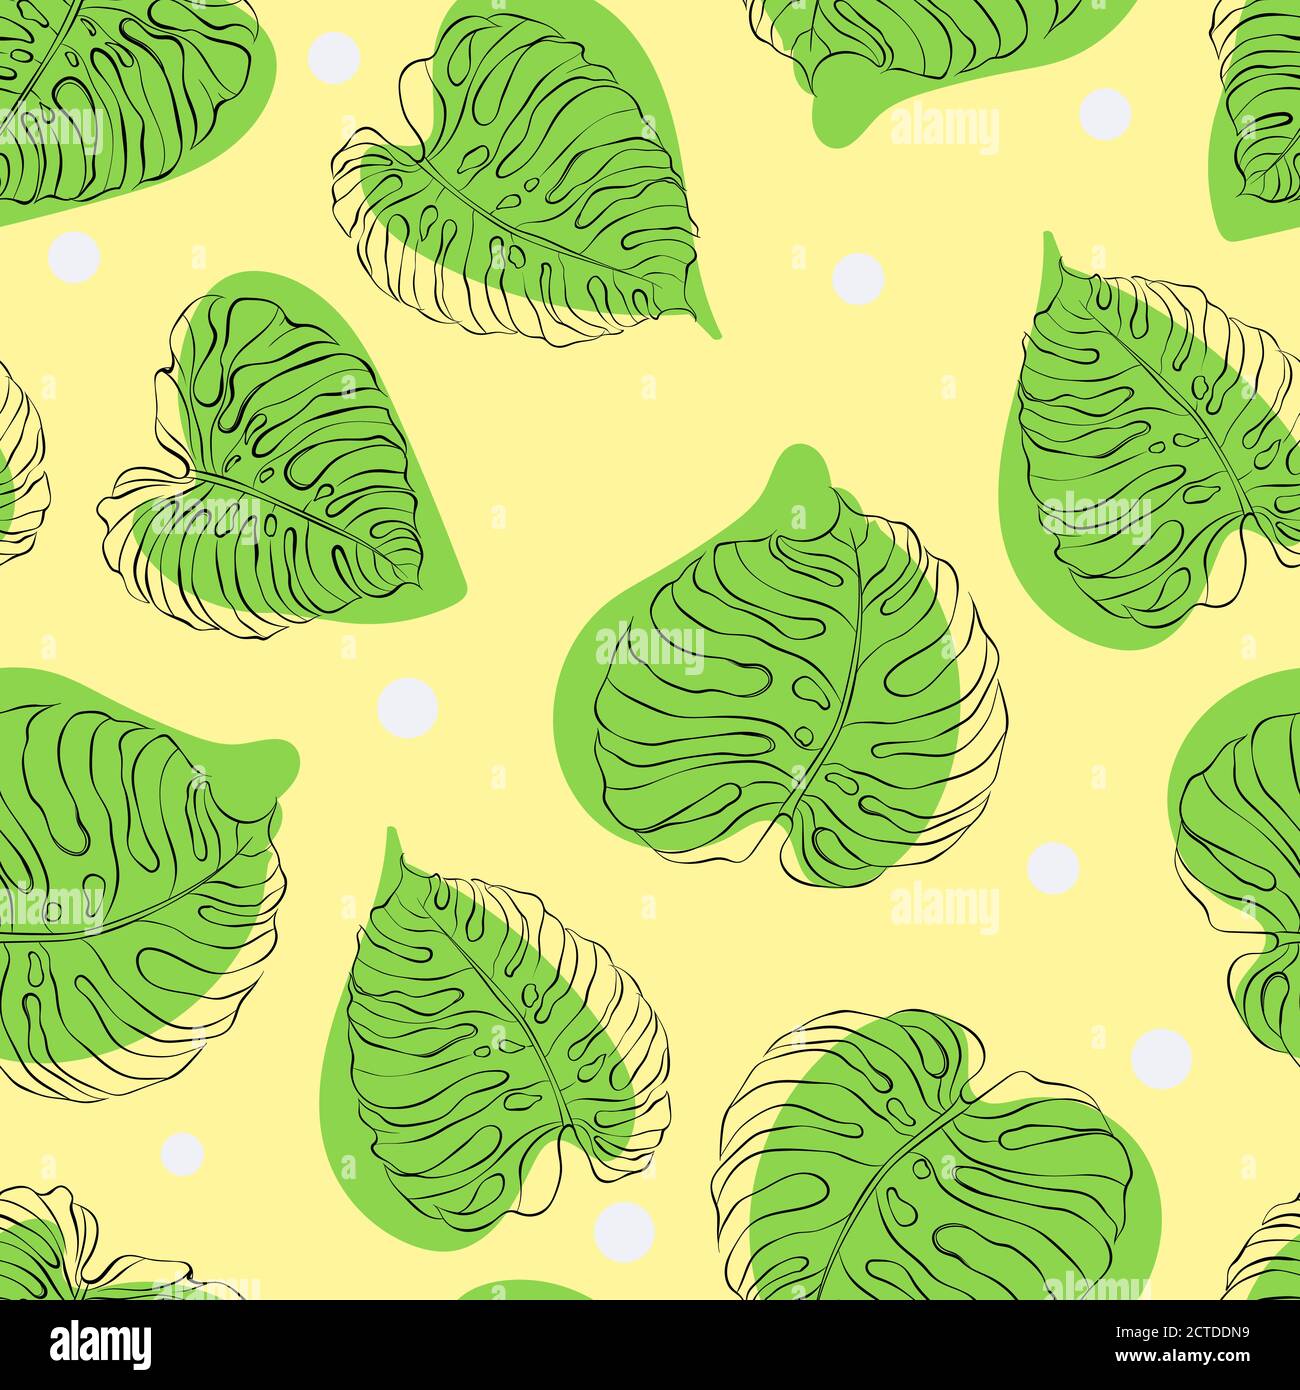 Seamless vector pattern with monstera tropical leaf on yellow background. Hand drawn illustration. Fabric, wrapping paper texture. Design for card, postcard, poster, banner. Stock Vector